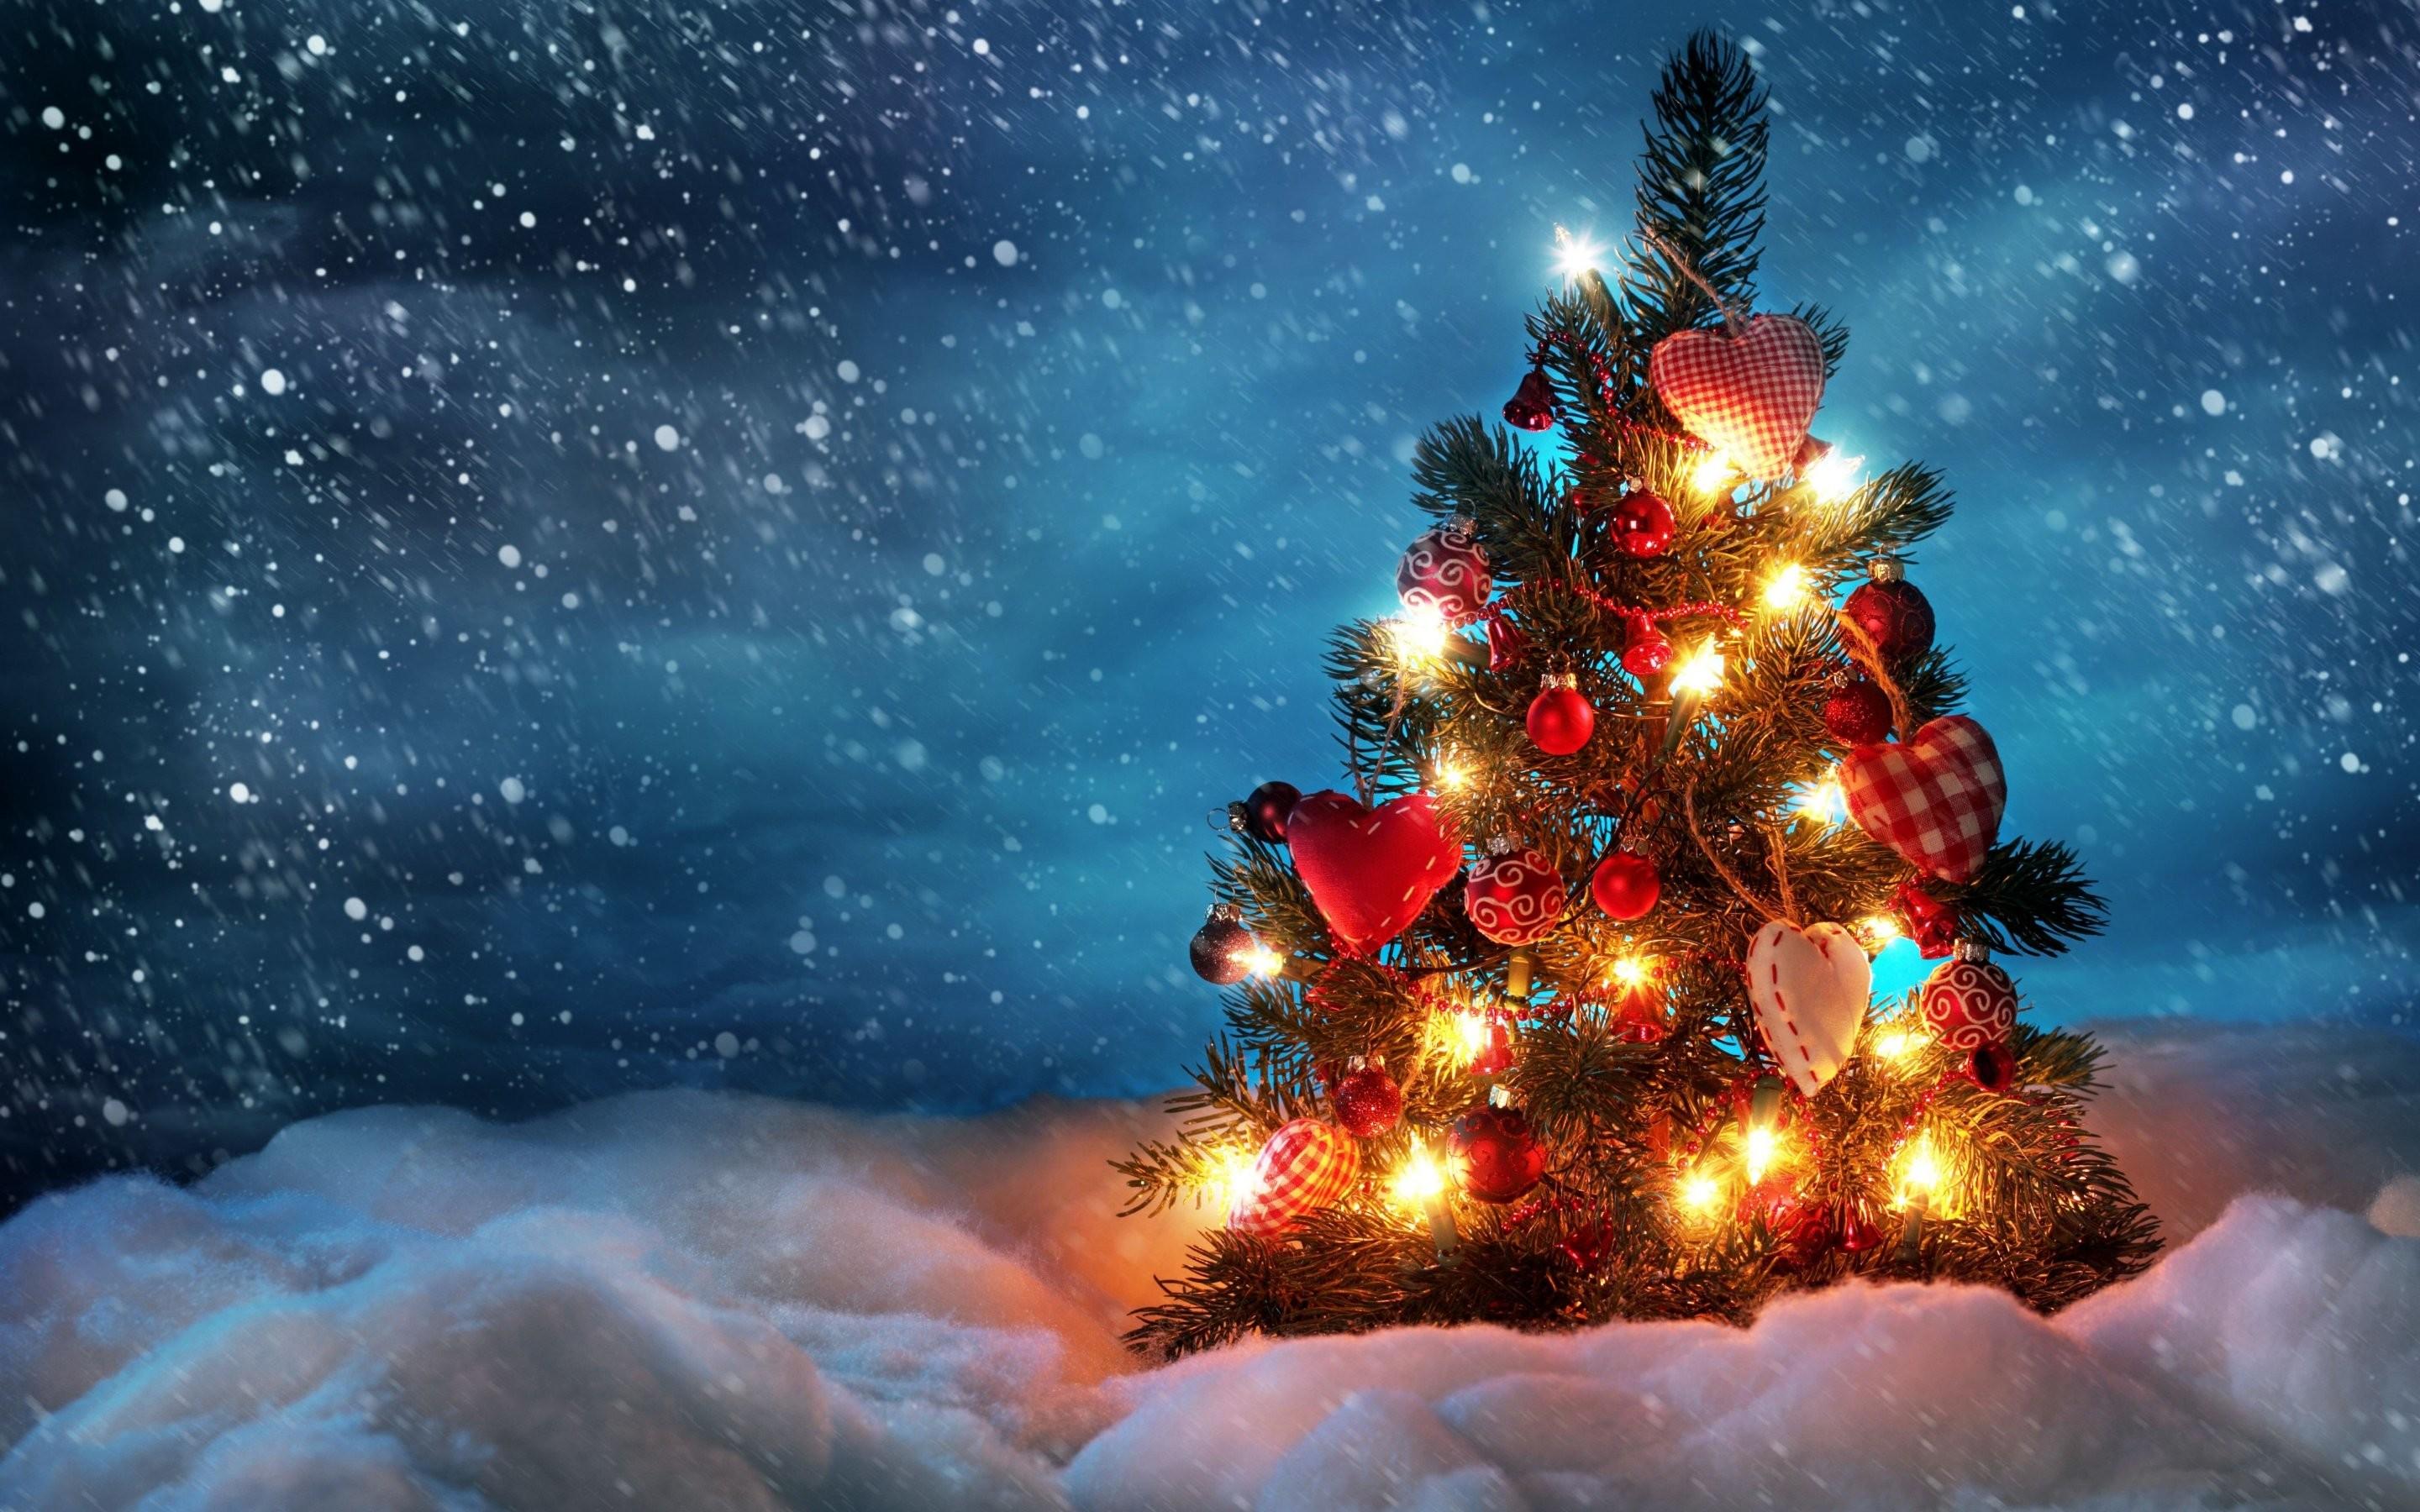 Free Merry Christmas Wallpapers HD Image for iPhone & Desktop